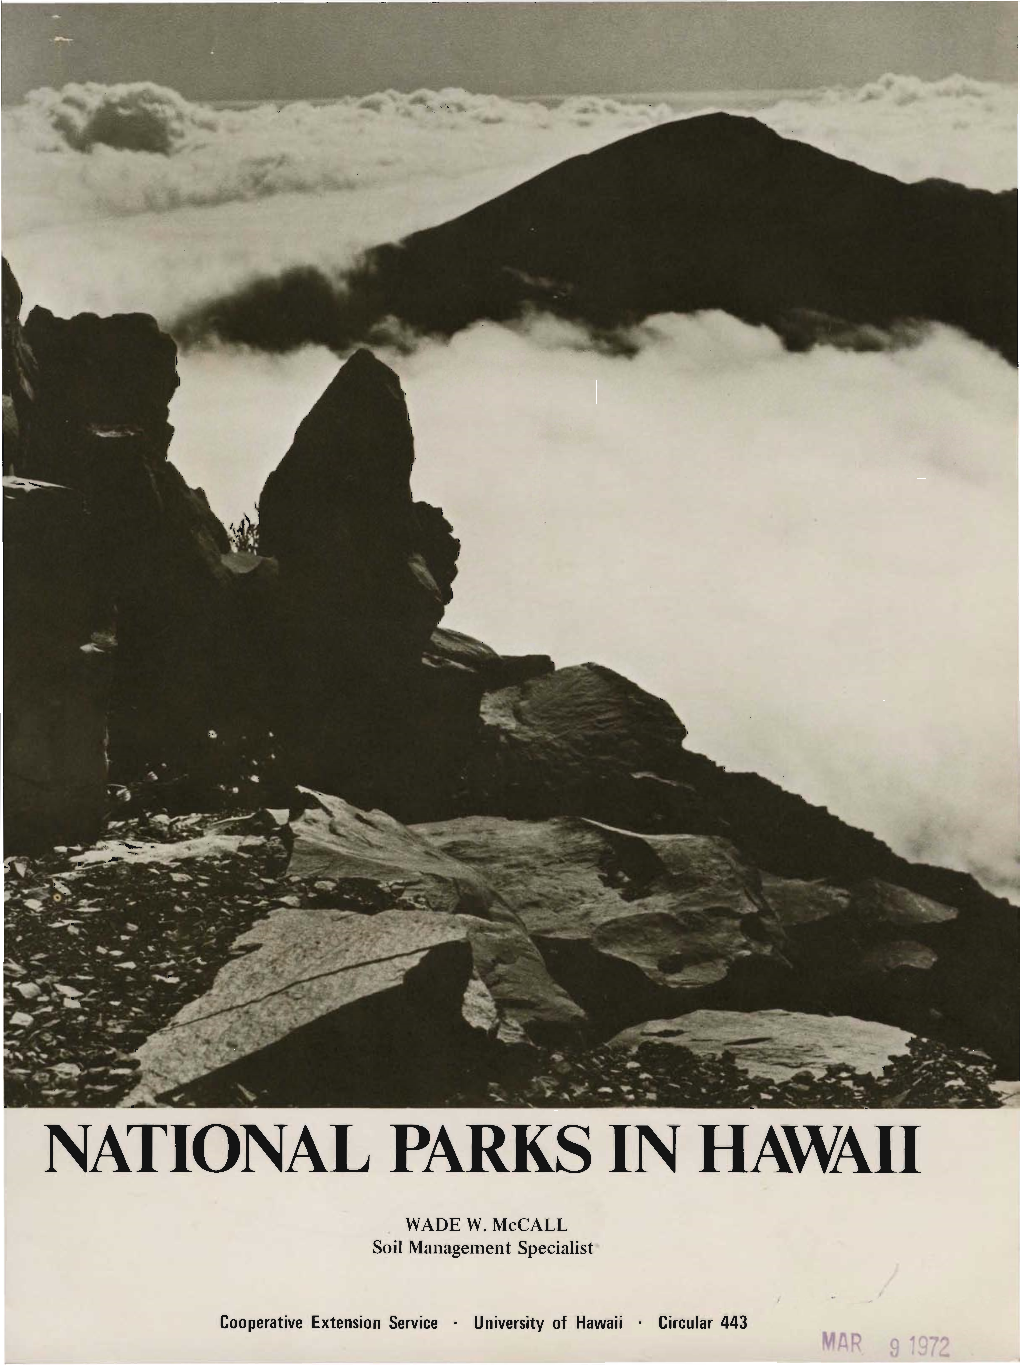 National Parks in Hawaii